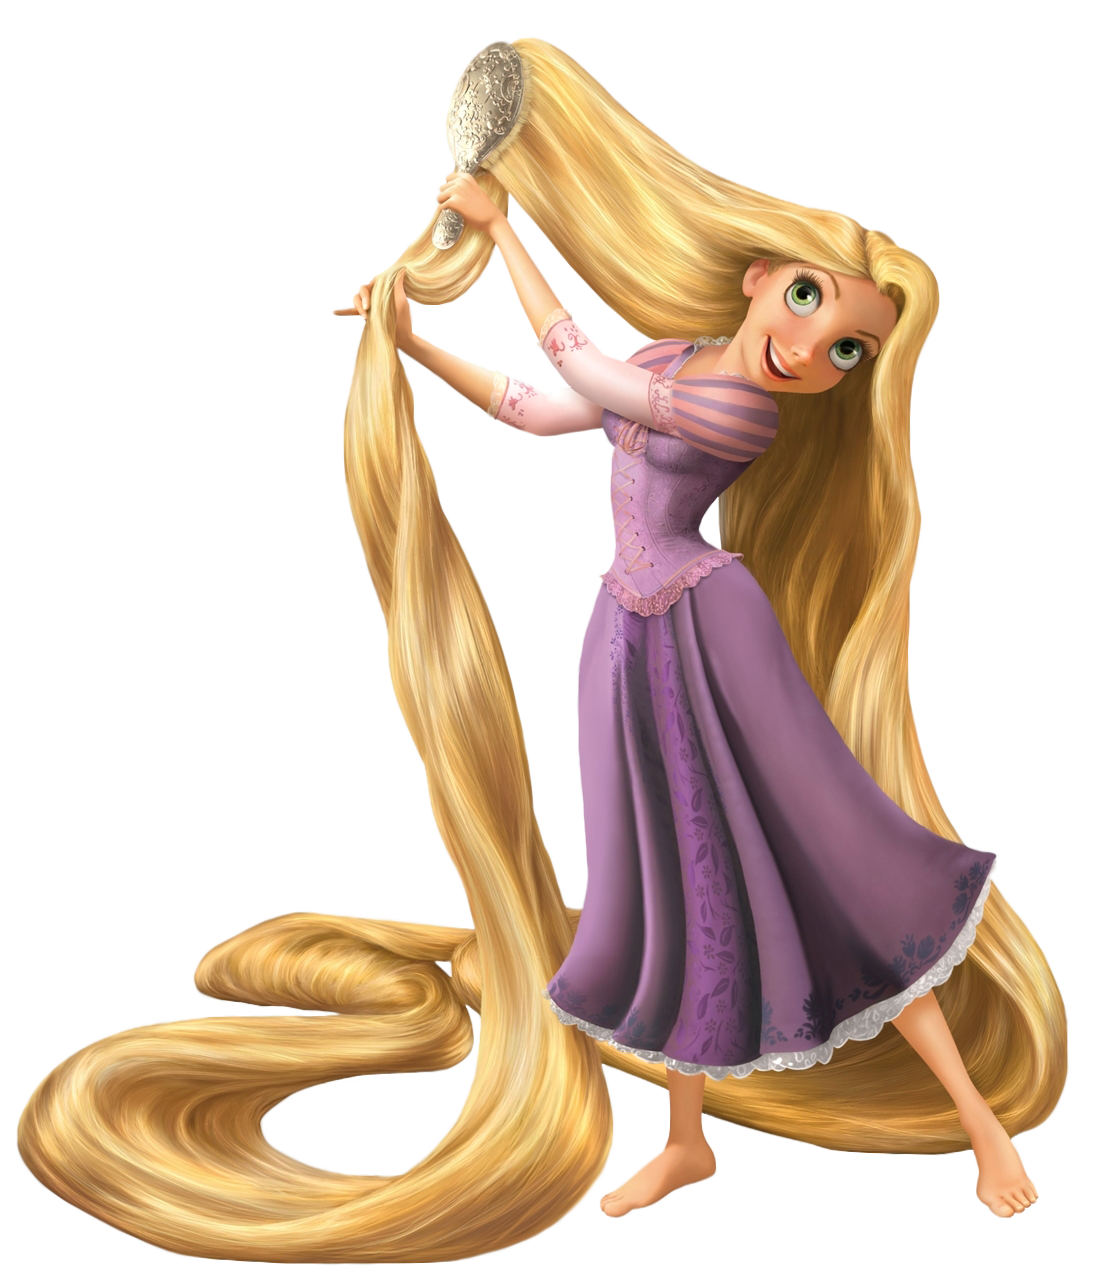 Rapunzel png picture gallery. Tower clipart tangled tower